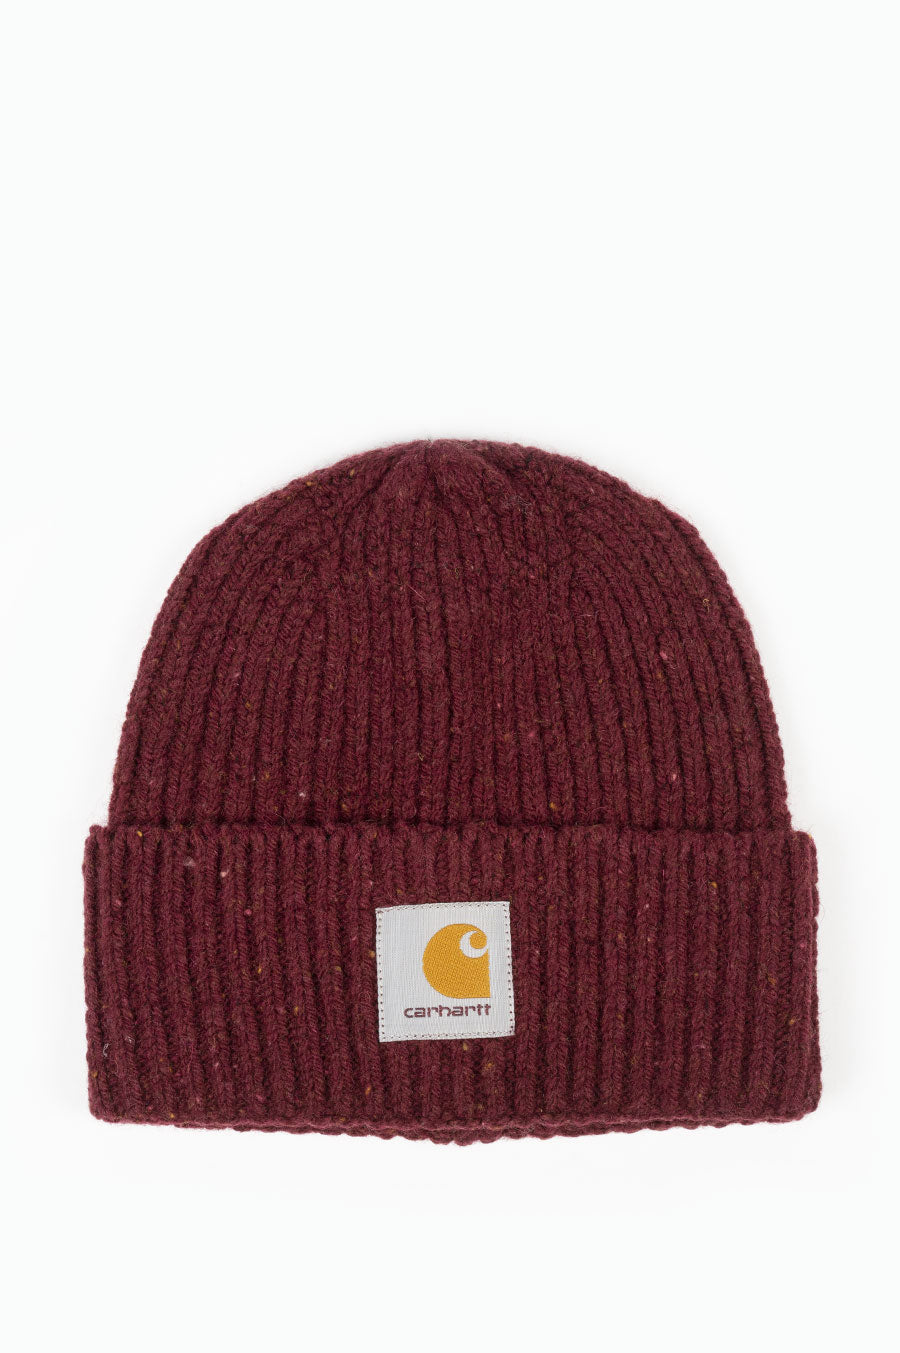 CARHARTT WIP ANGLISTIC BEANIE SPECKLED WINE